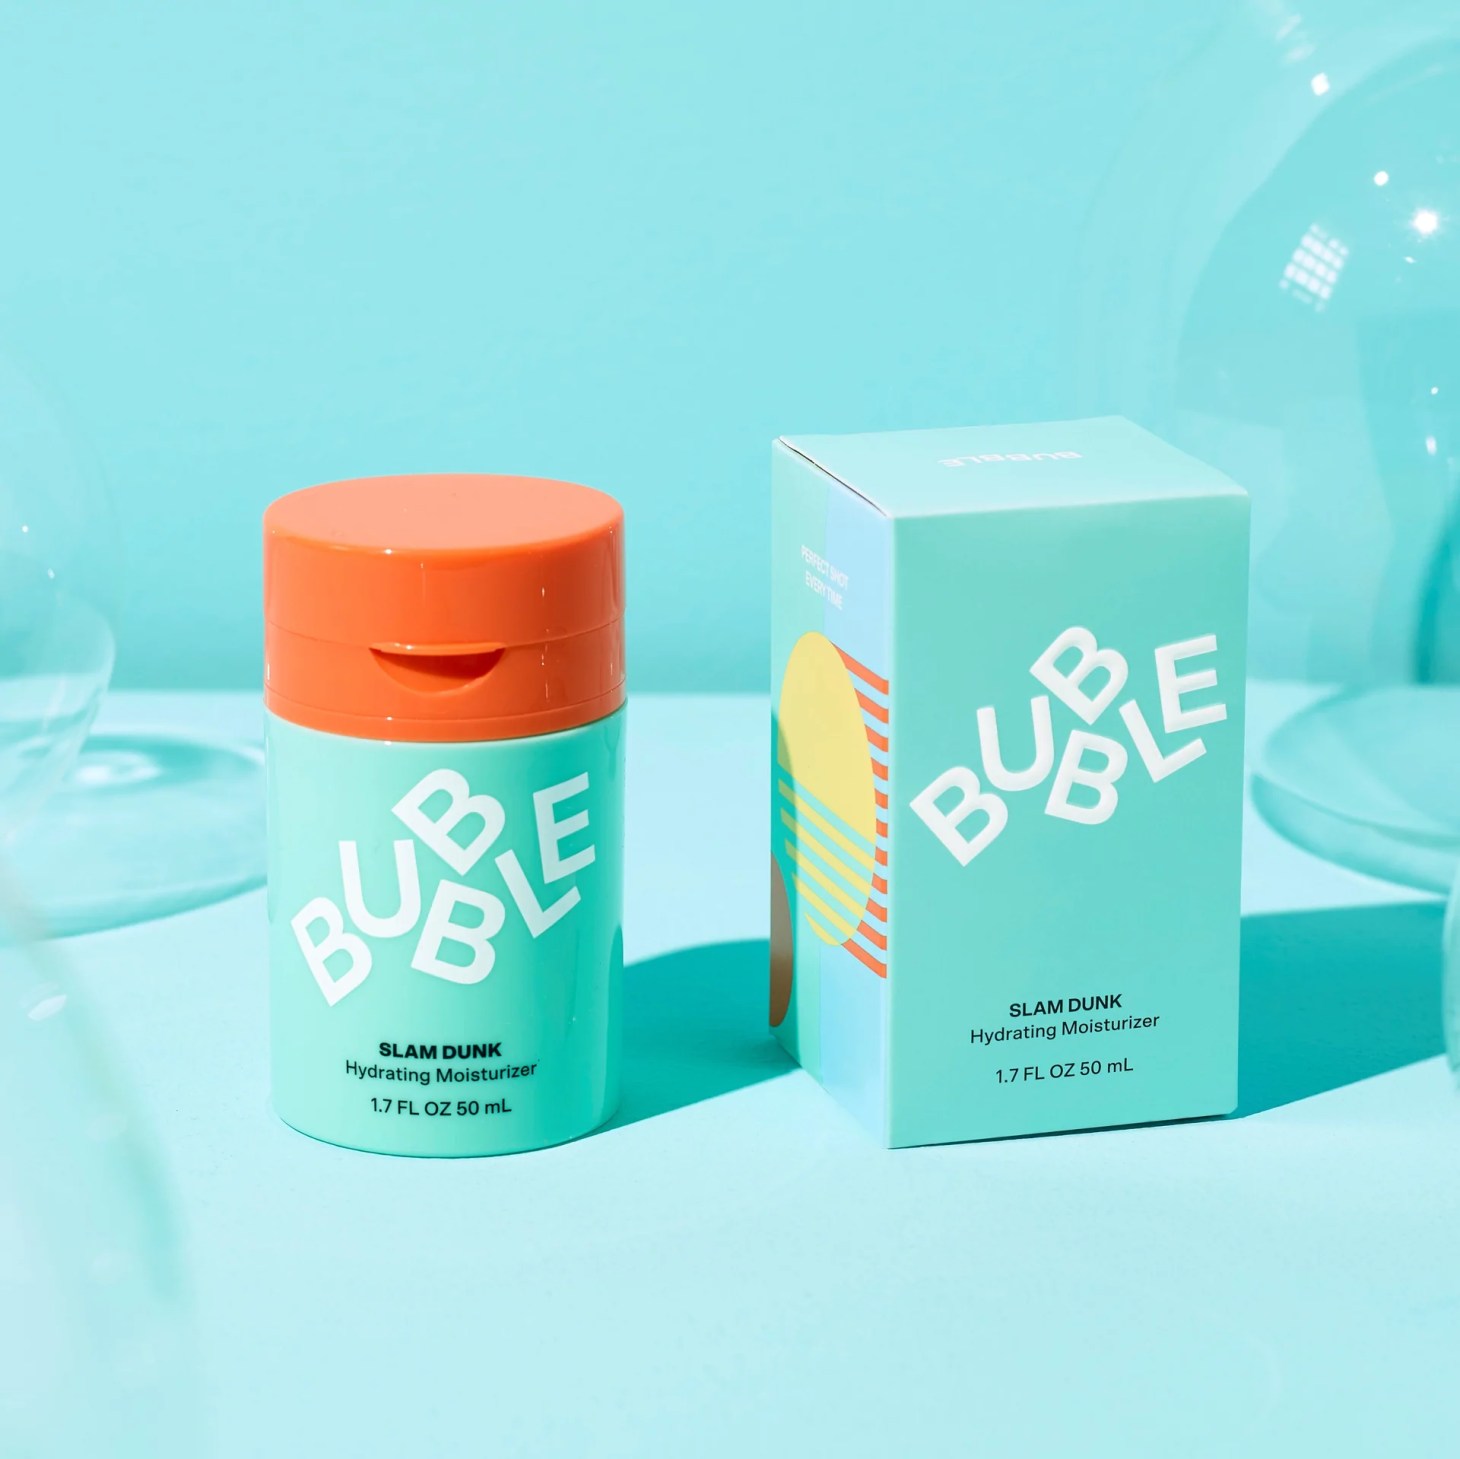 bubble slam dunk moisturizer and box on a blue background